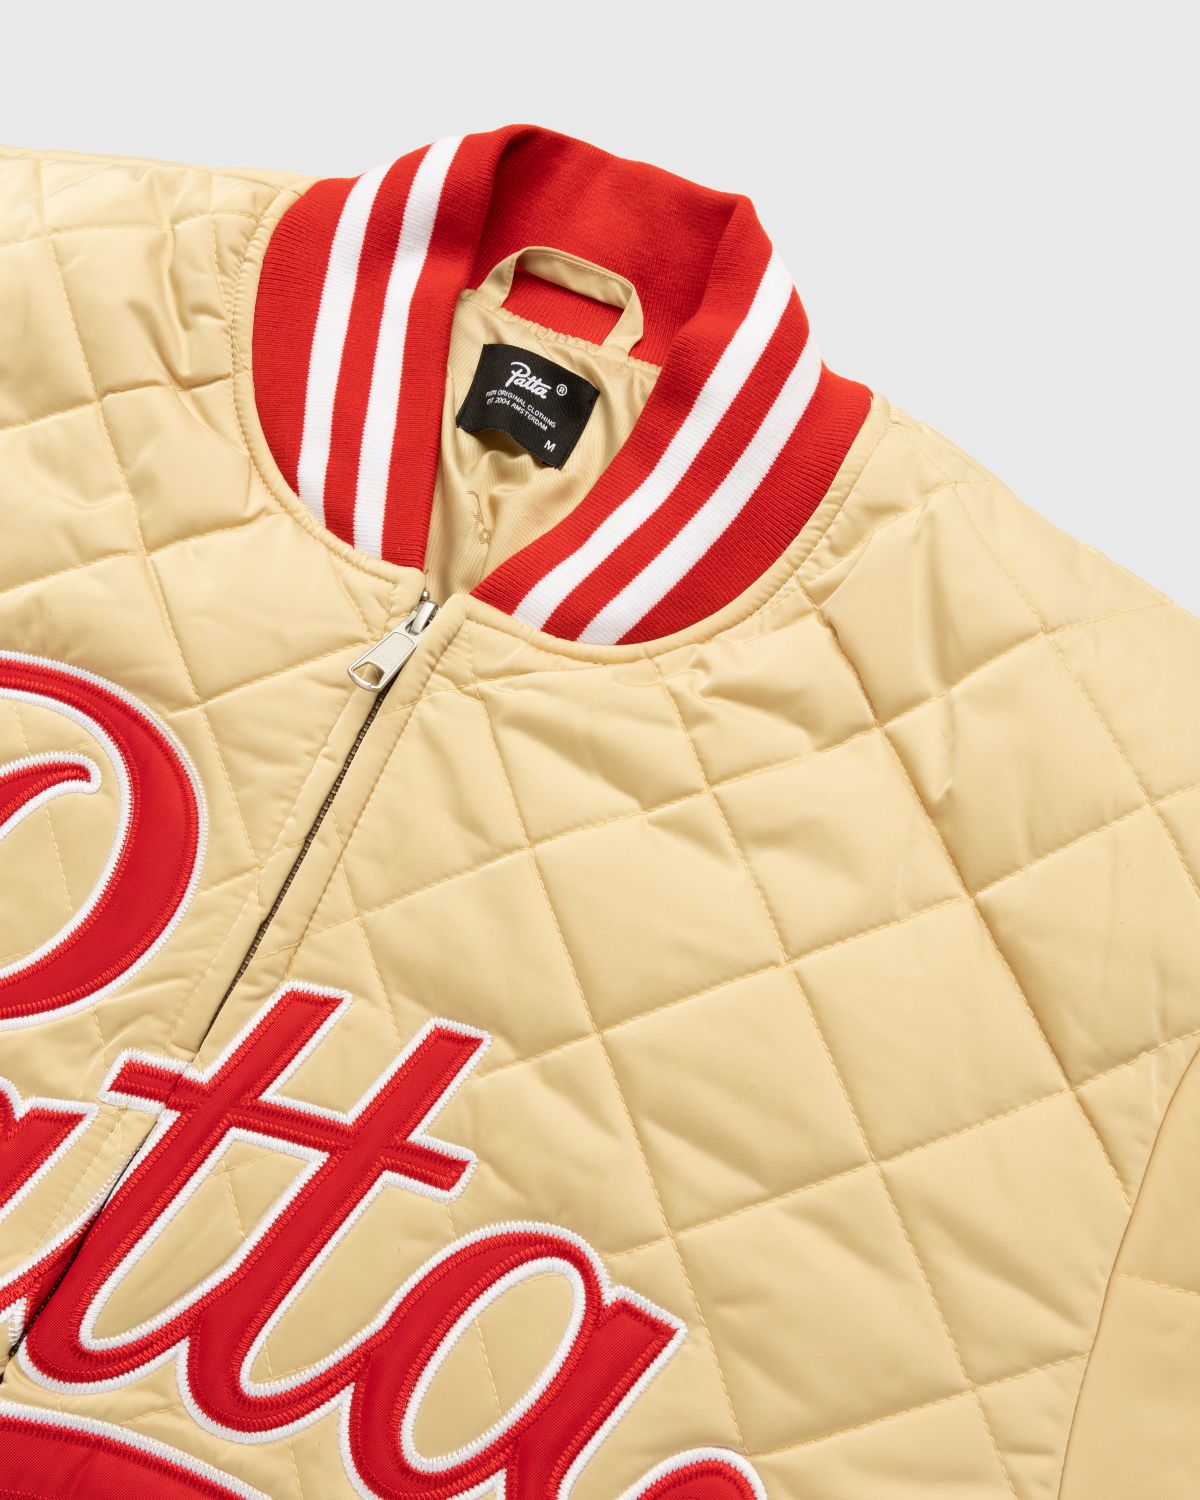 Patta – Diamond Quilted Sports Jacket Mojave Desert - Outerwear - Brown - Image 4